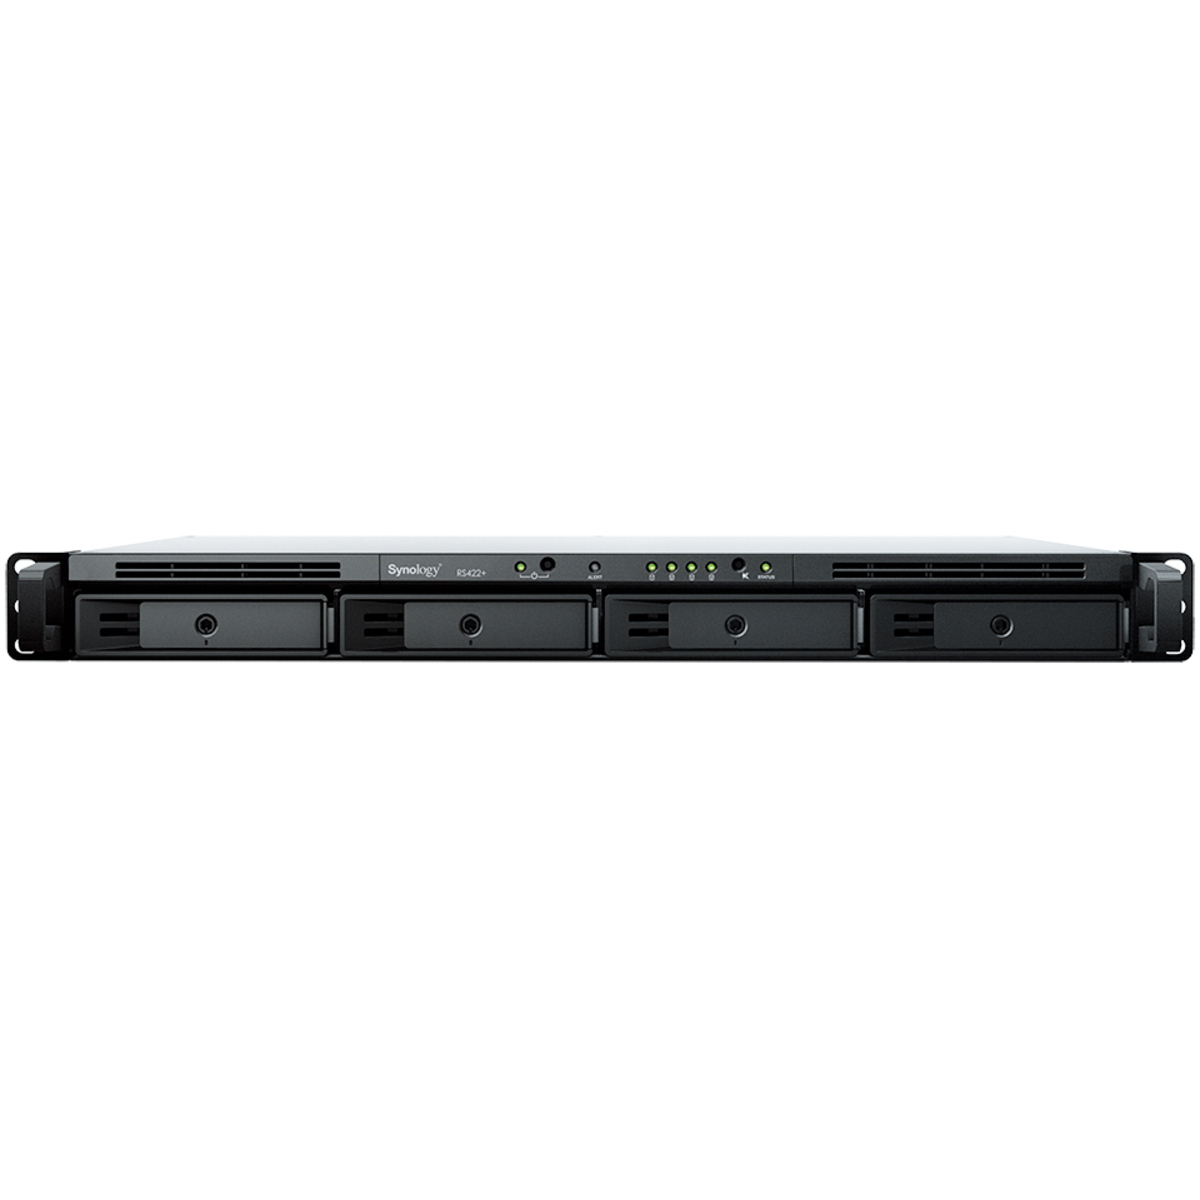 Synology RackStation RS422+ 48tb 4-Bay RackMount Personal / Basic Home / Small Office NAS - Network Attached Storage Device 4x12tb Western Digital Ultrastar DC HC520 HUH721212ALE600 3.5 7200rpm SATA 6Gb/s HDD ENTERPRISE Class Drives Installed - Burn-In Tested RackStation RS422+